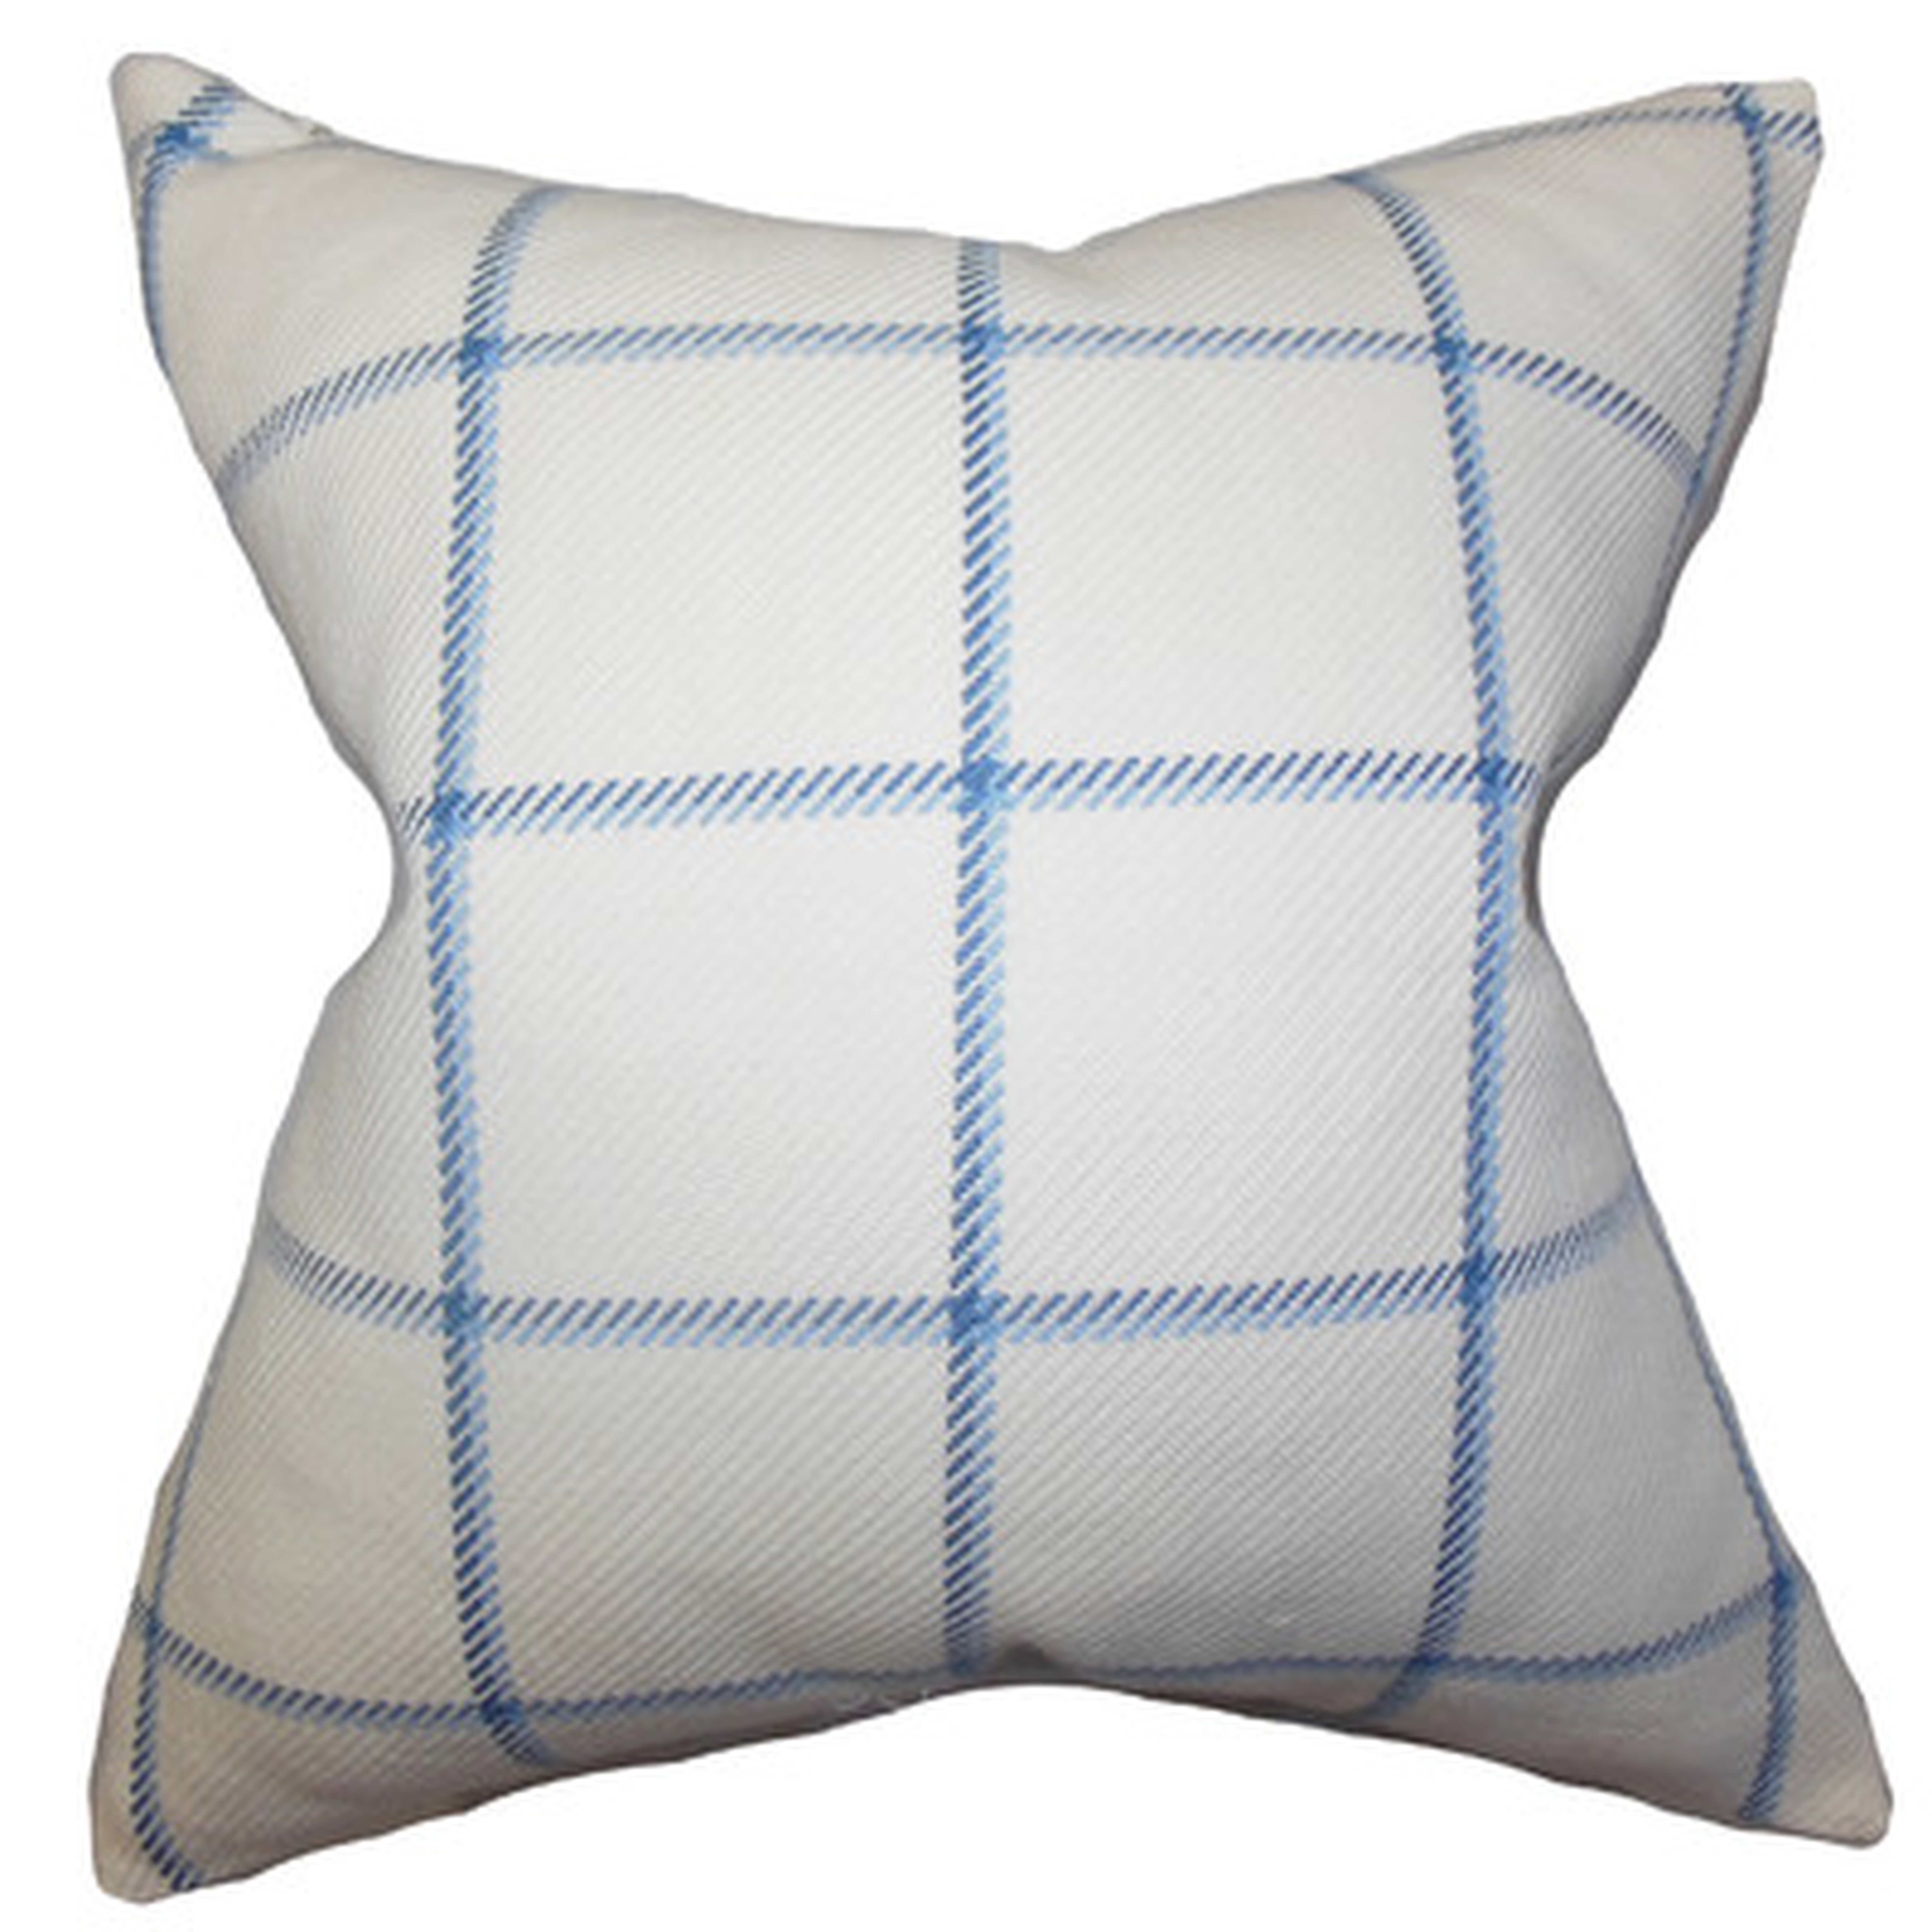 Temples Plaid Cotton Throw Pillow 18" x 18" with insert - Wayfair